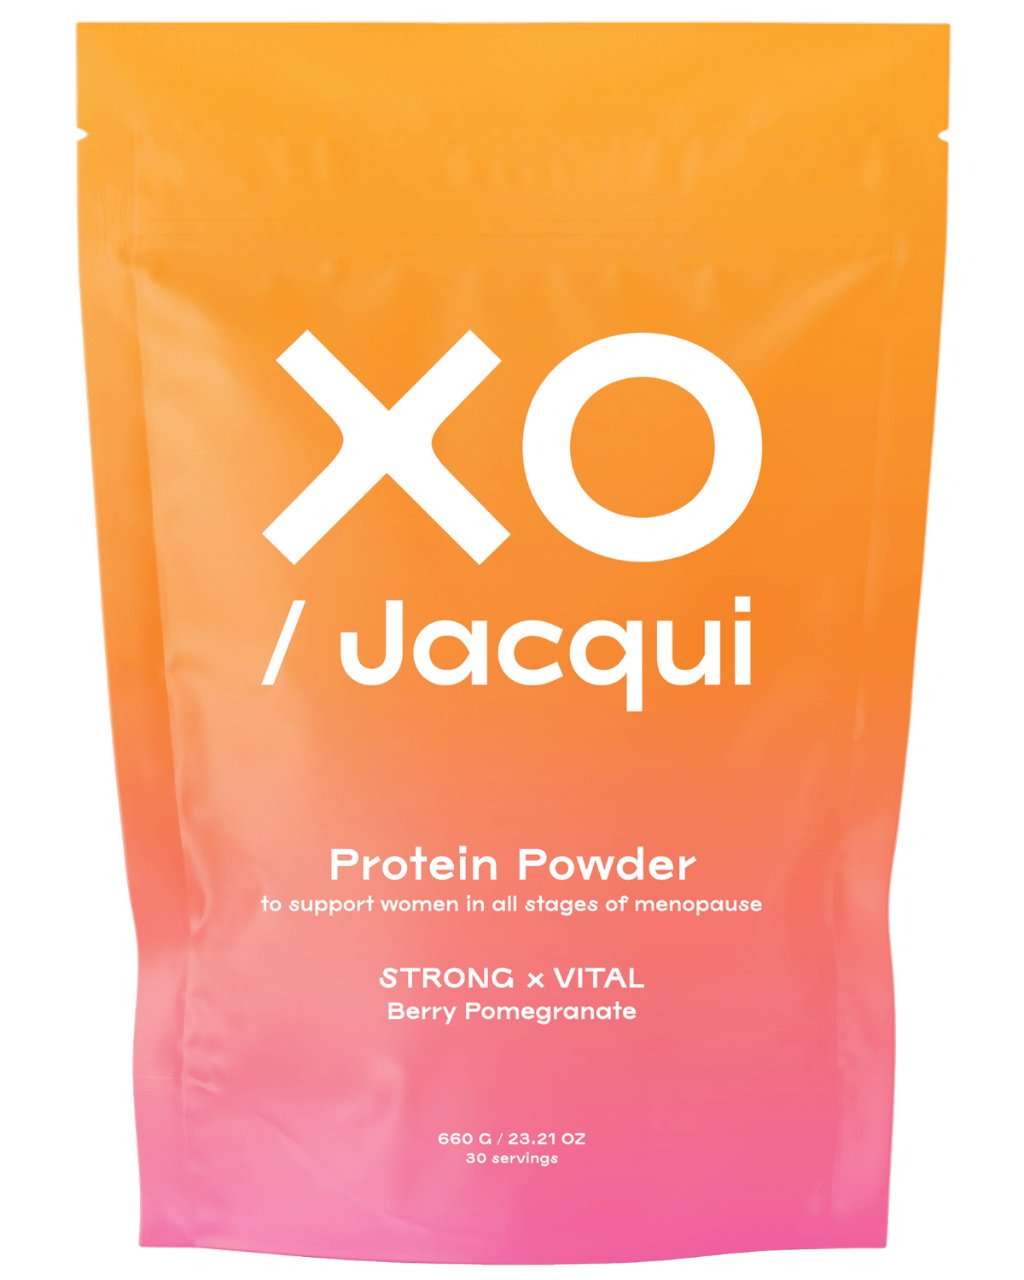 Strong + Vital | Menopause Support Protein Powder | Berry Pomegranate Protein Powder - XO Jacqui